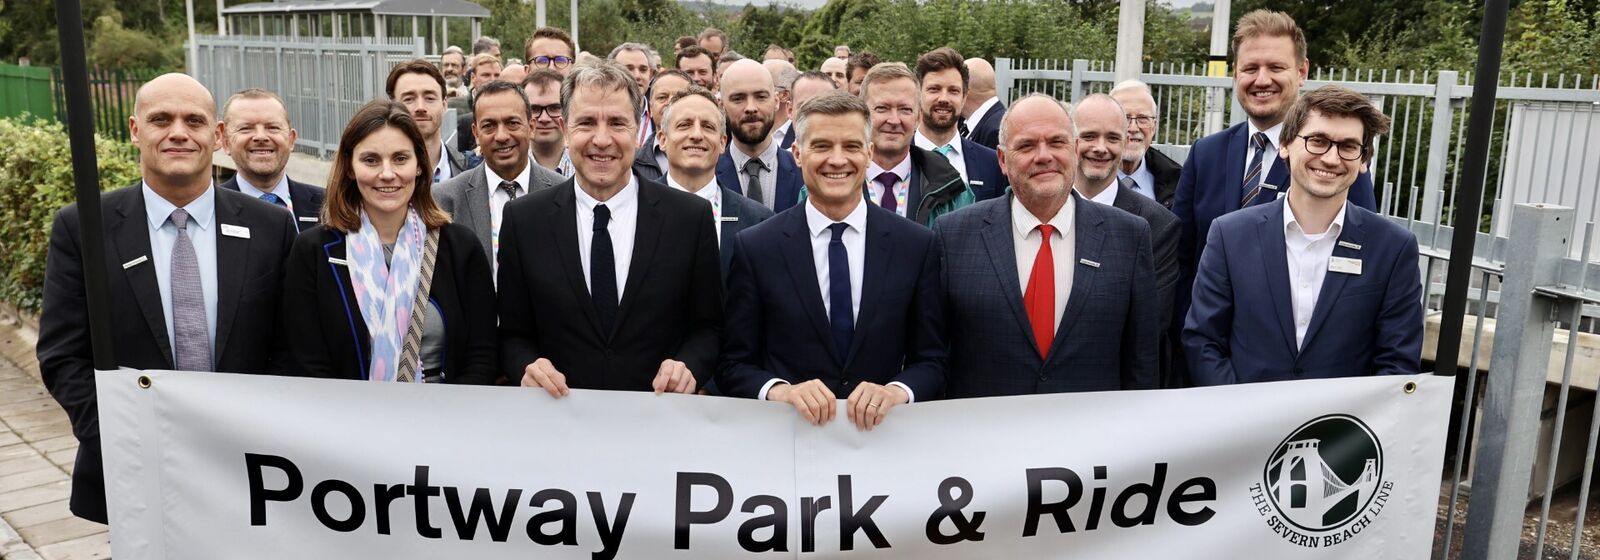 Group stand behind portway P&R sign